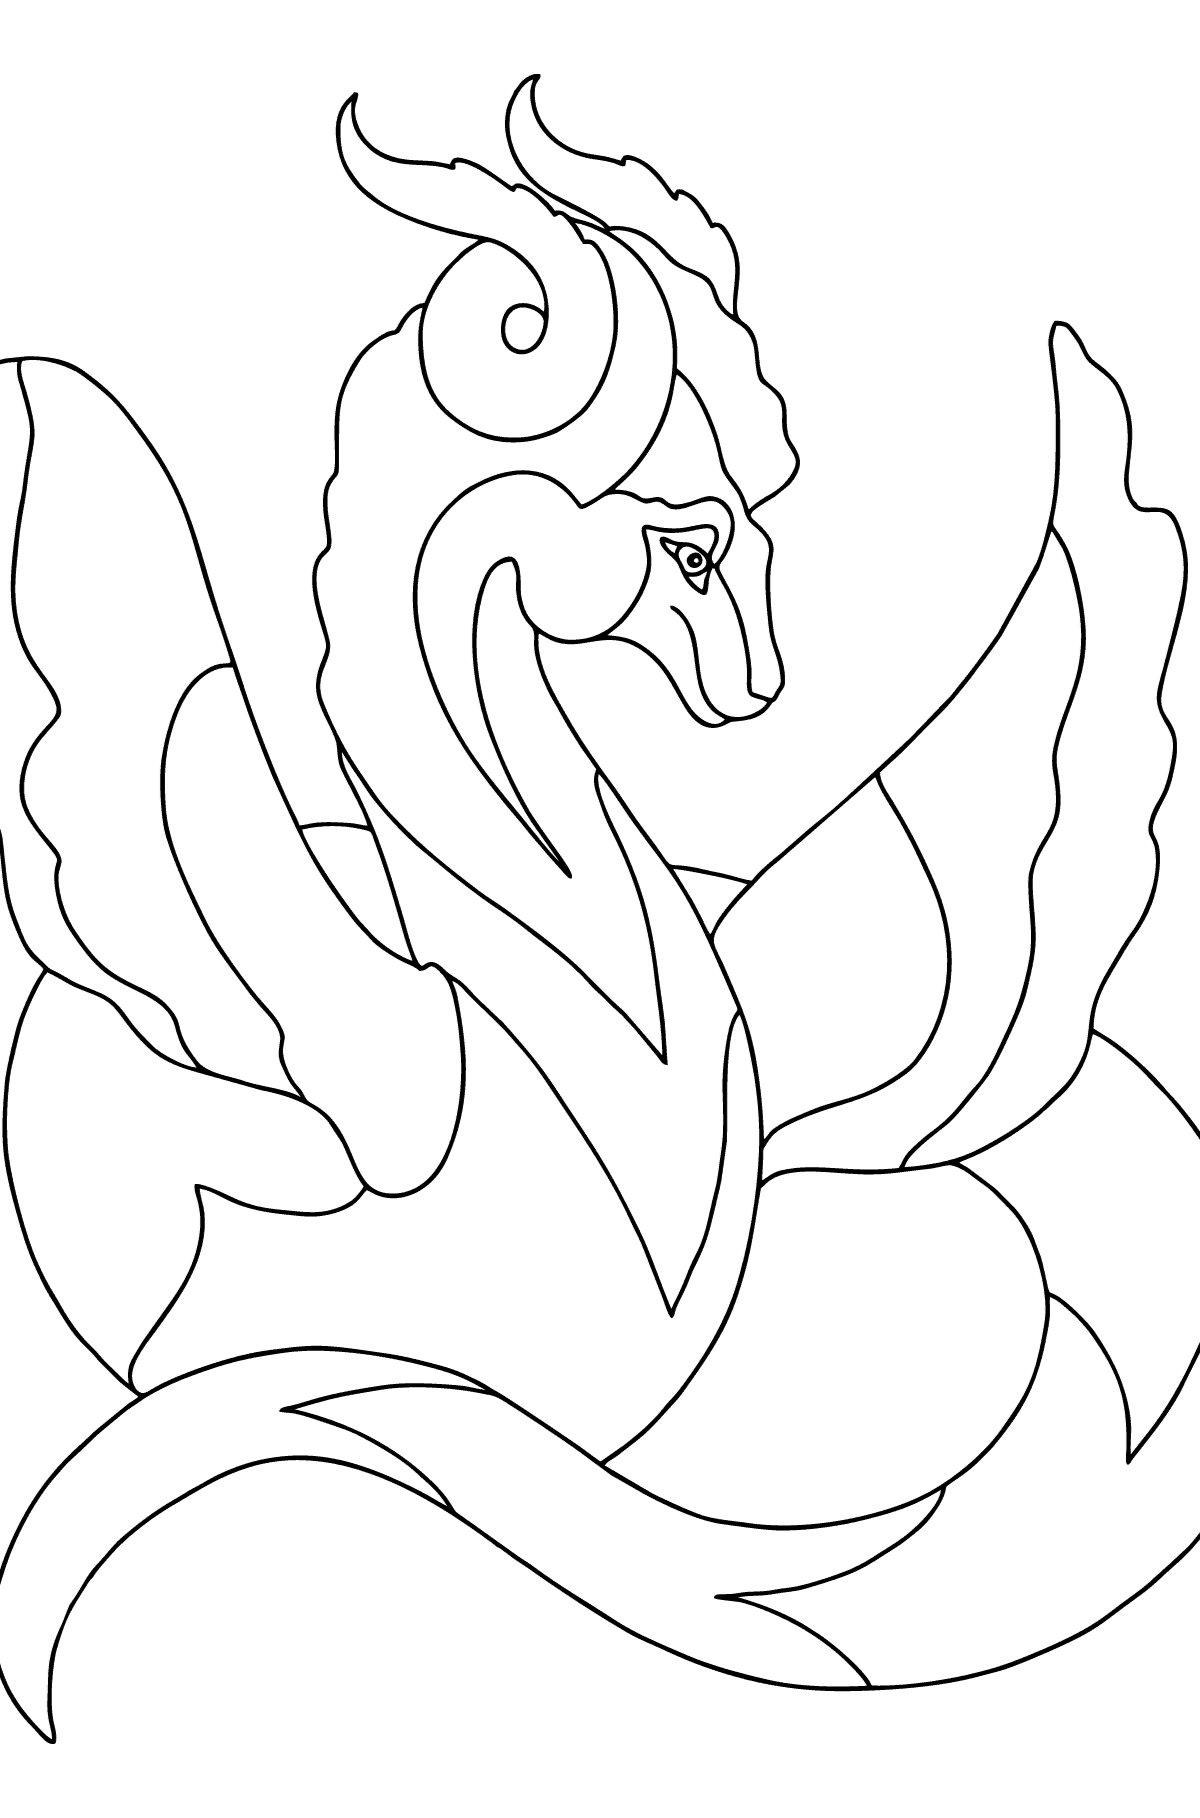 Wonderful Dragon Coloring page (difficult) - Coloring Pages for Kids